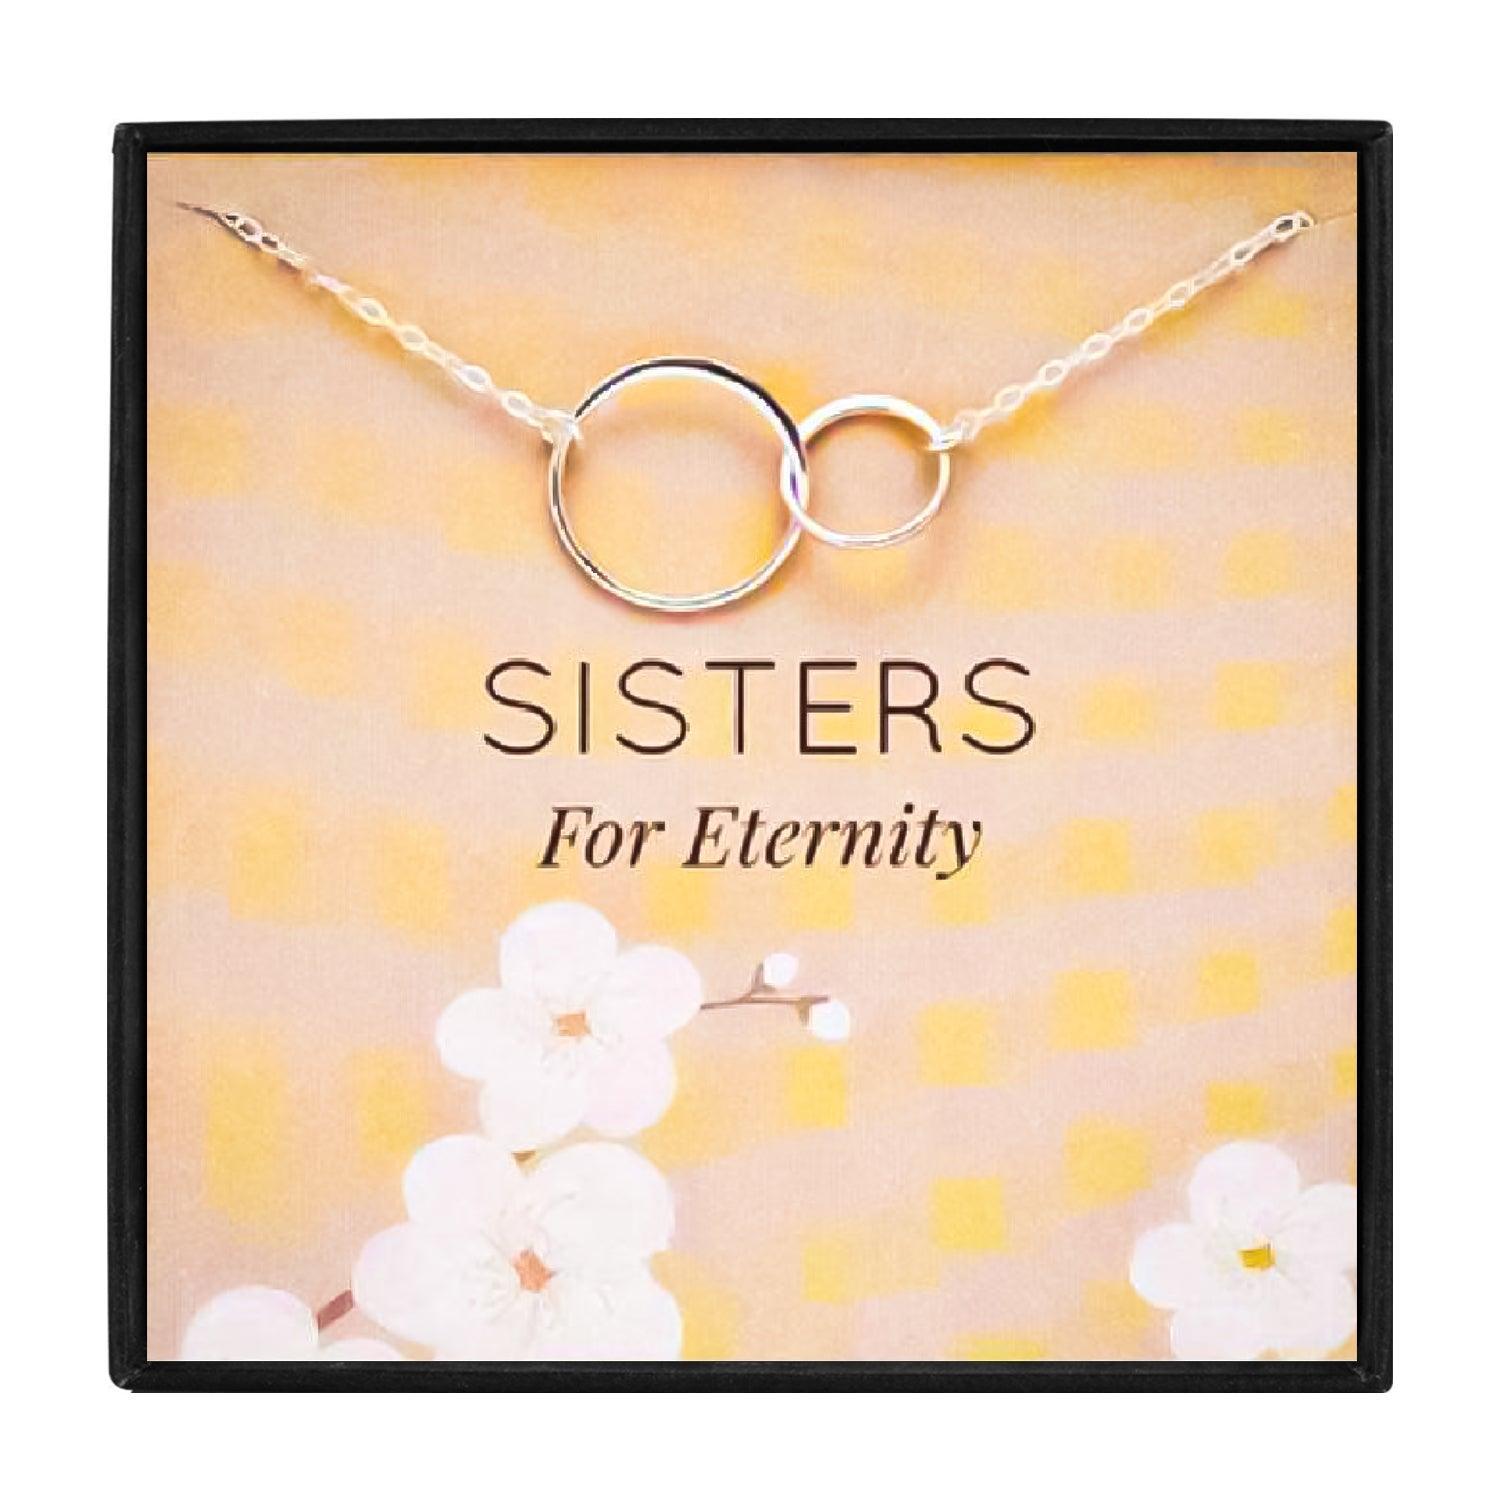 Double Circle Necklaces Gift For Sisters in 2023 | Double Circle Necklaces Gift For Sisters - undefined | gift for sister, gift ideas, necklace, Necklaces For Sisters, Sisters gift ideas | From Hunny Life | hunnylife.com